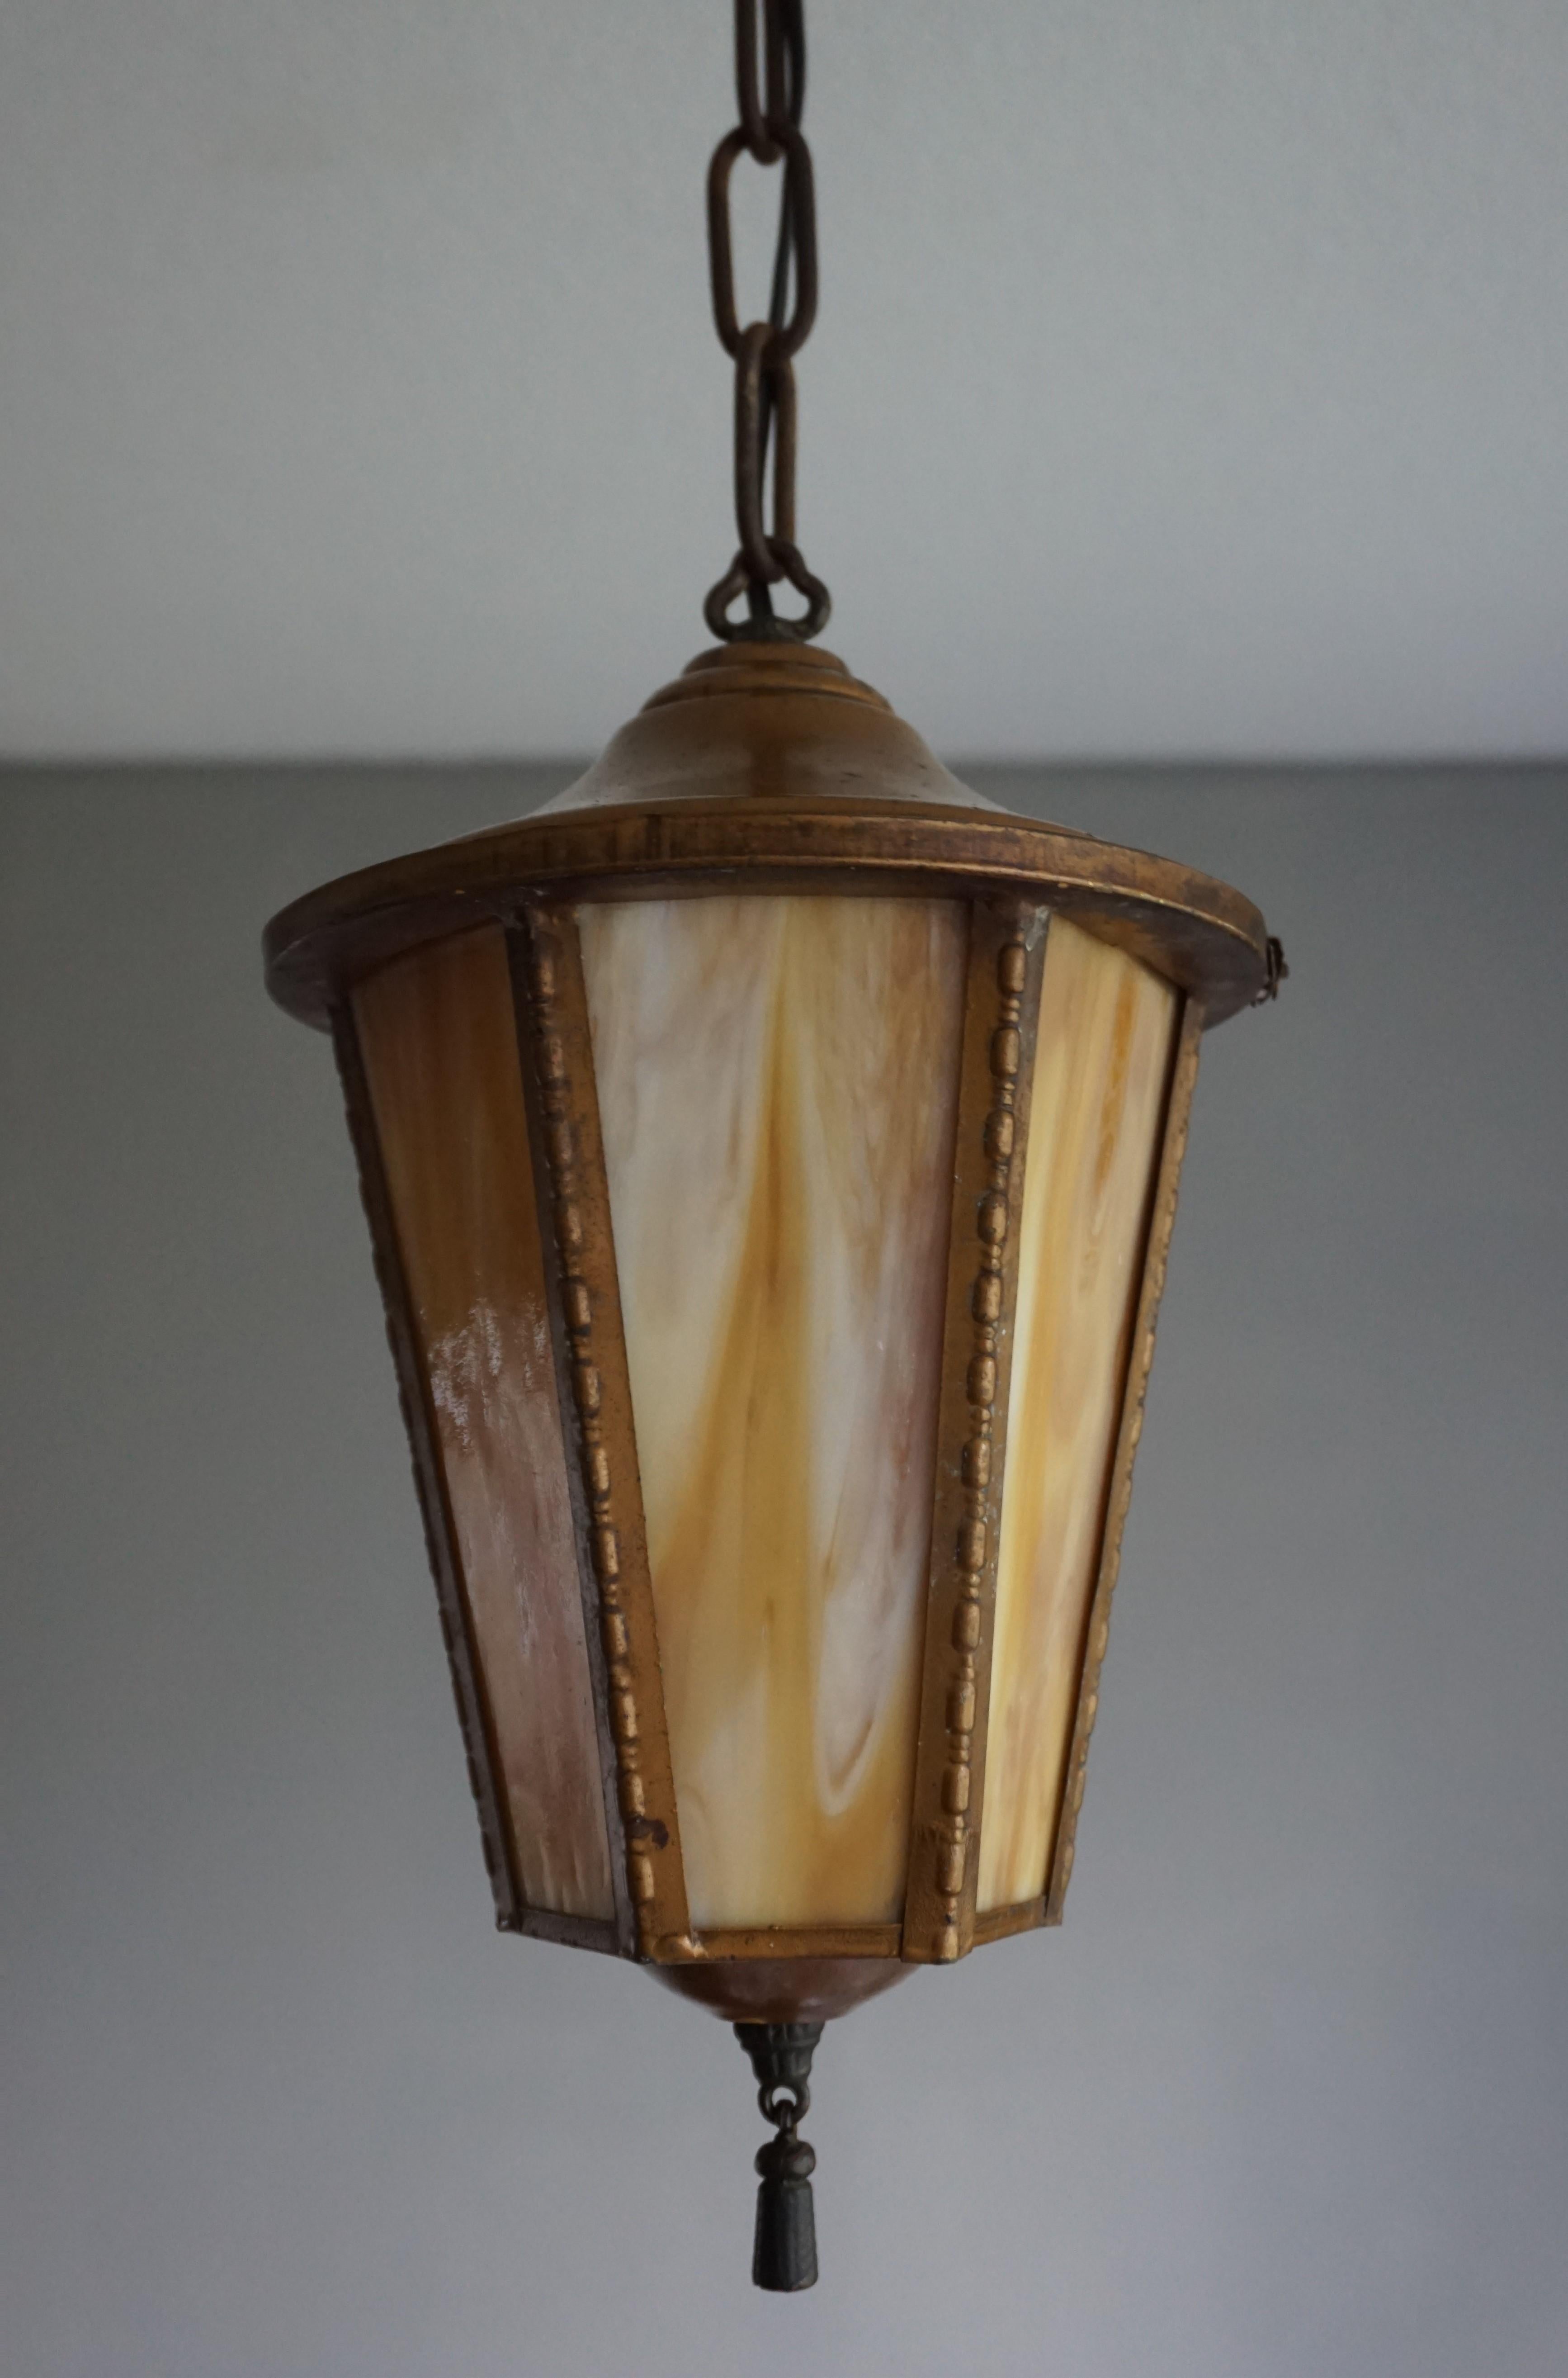 Blackened Early 1900s Golden Brown Metal & Tiffany Glass Church Entrance Pendant Light For Sale